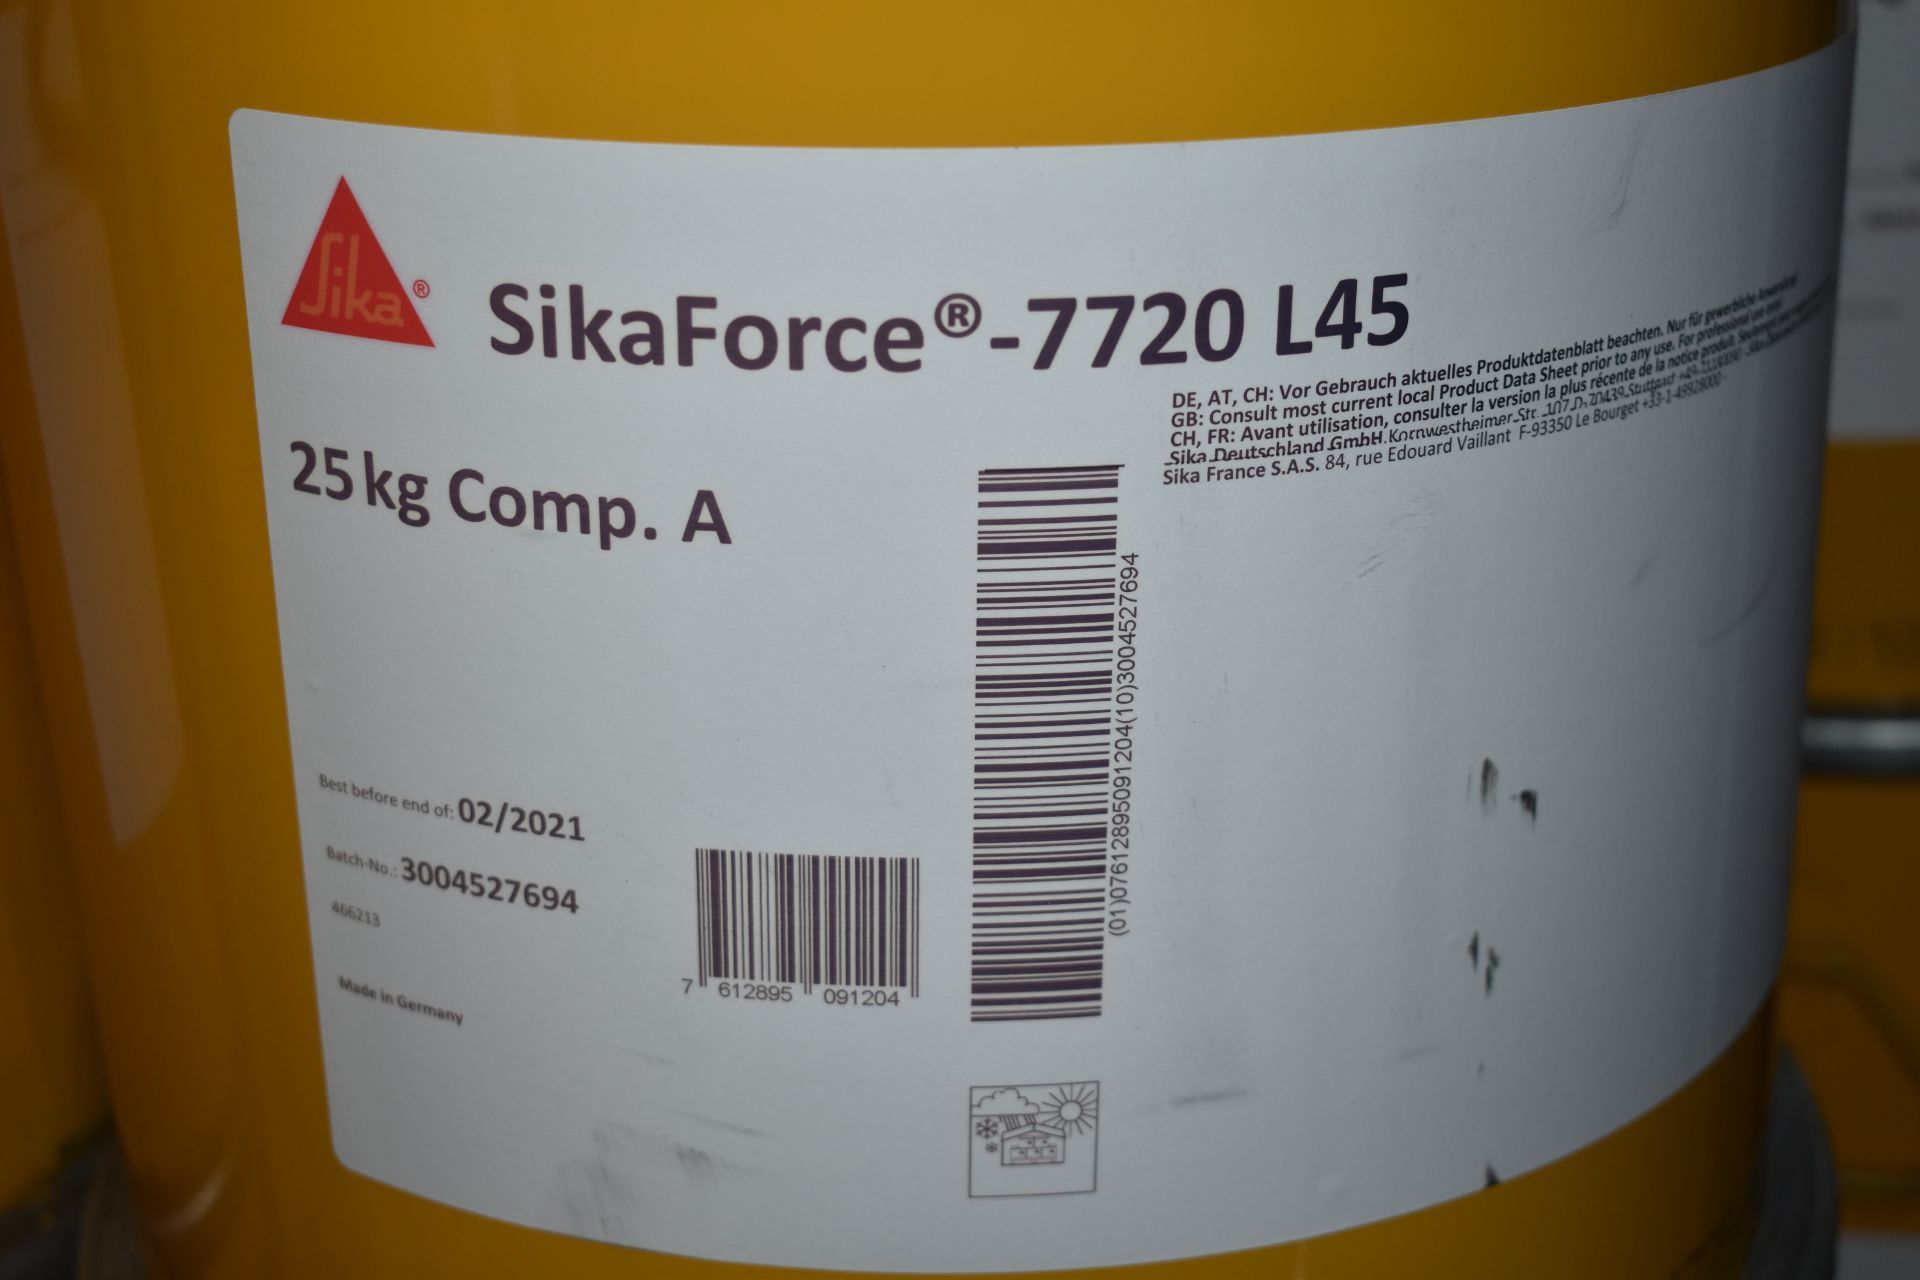 8 x SikaForce -7720 L45 None Sagging Assembly Adhesive 25kg Barrels- New Sealed Stock - CL622 - - Image 3 of 3